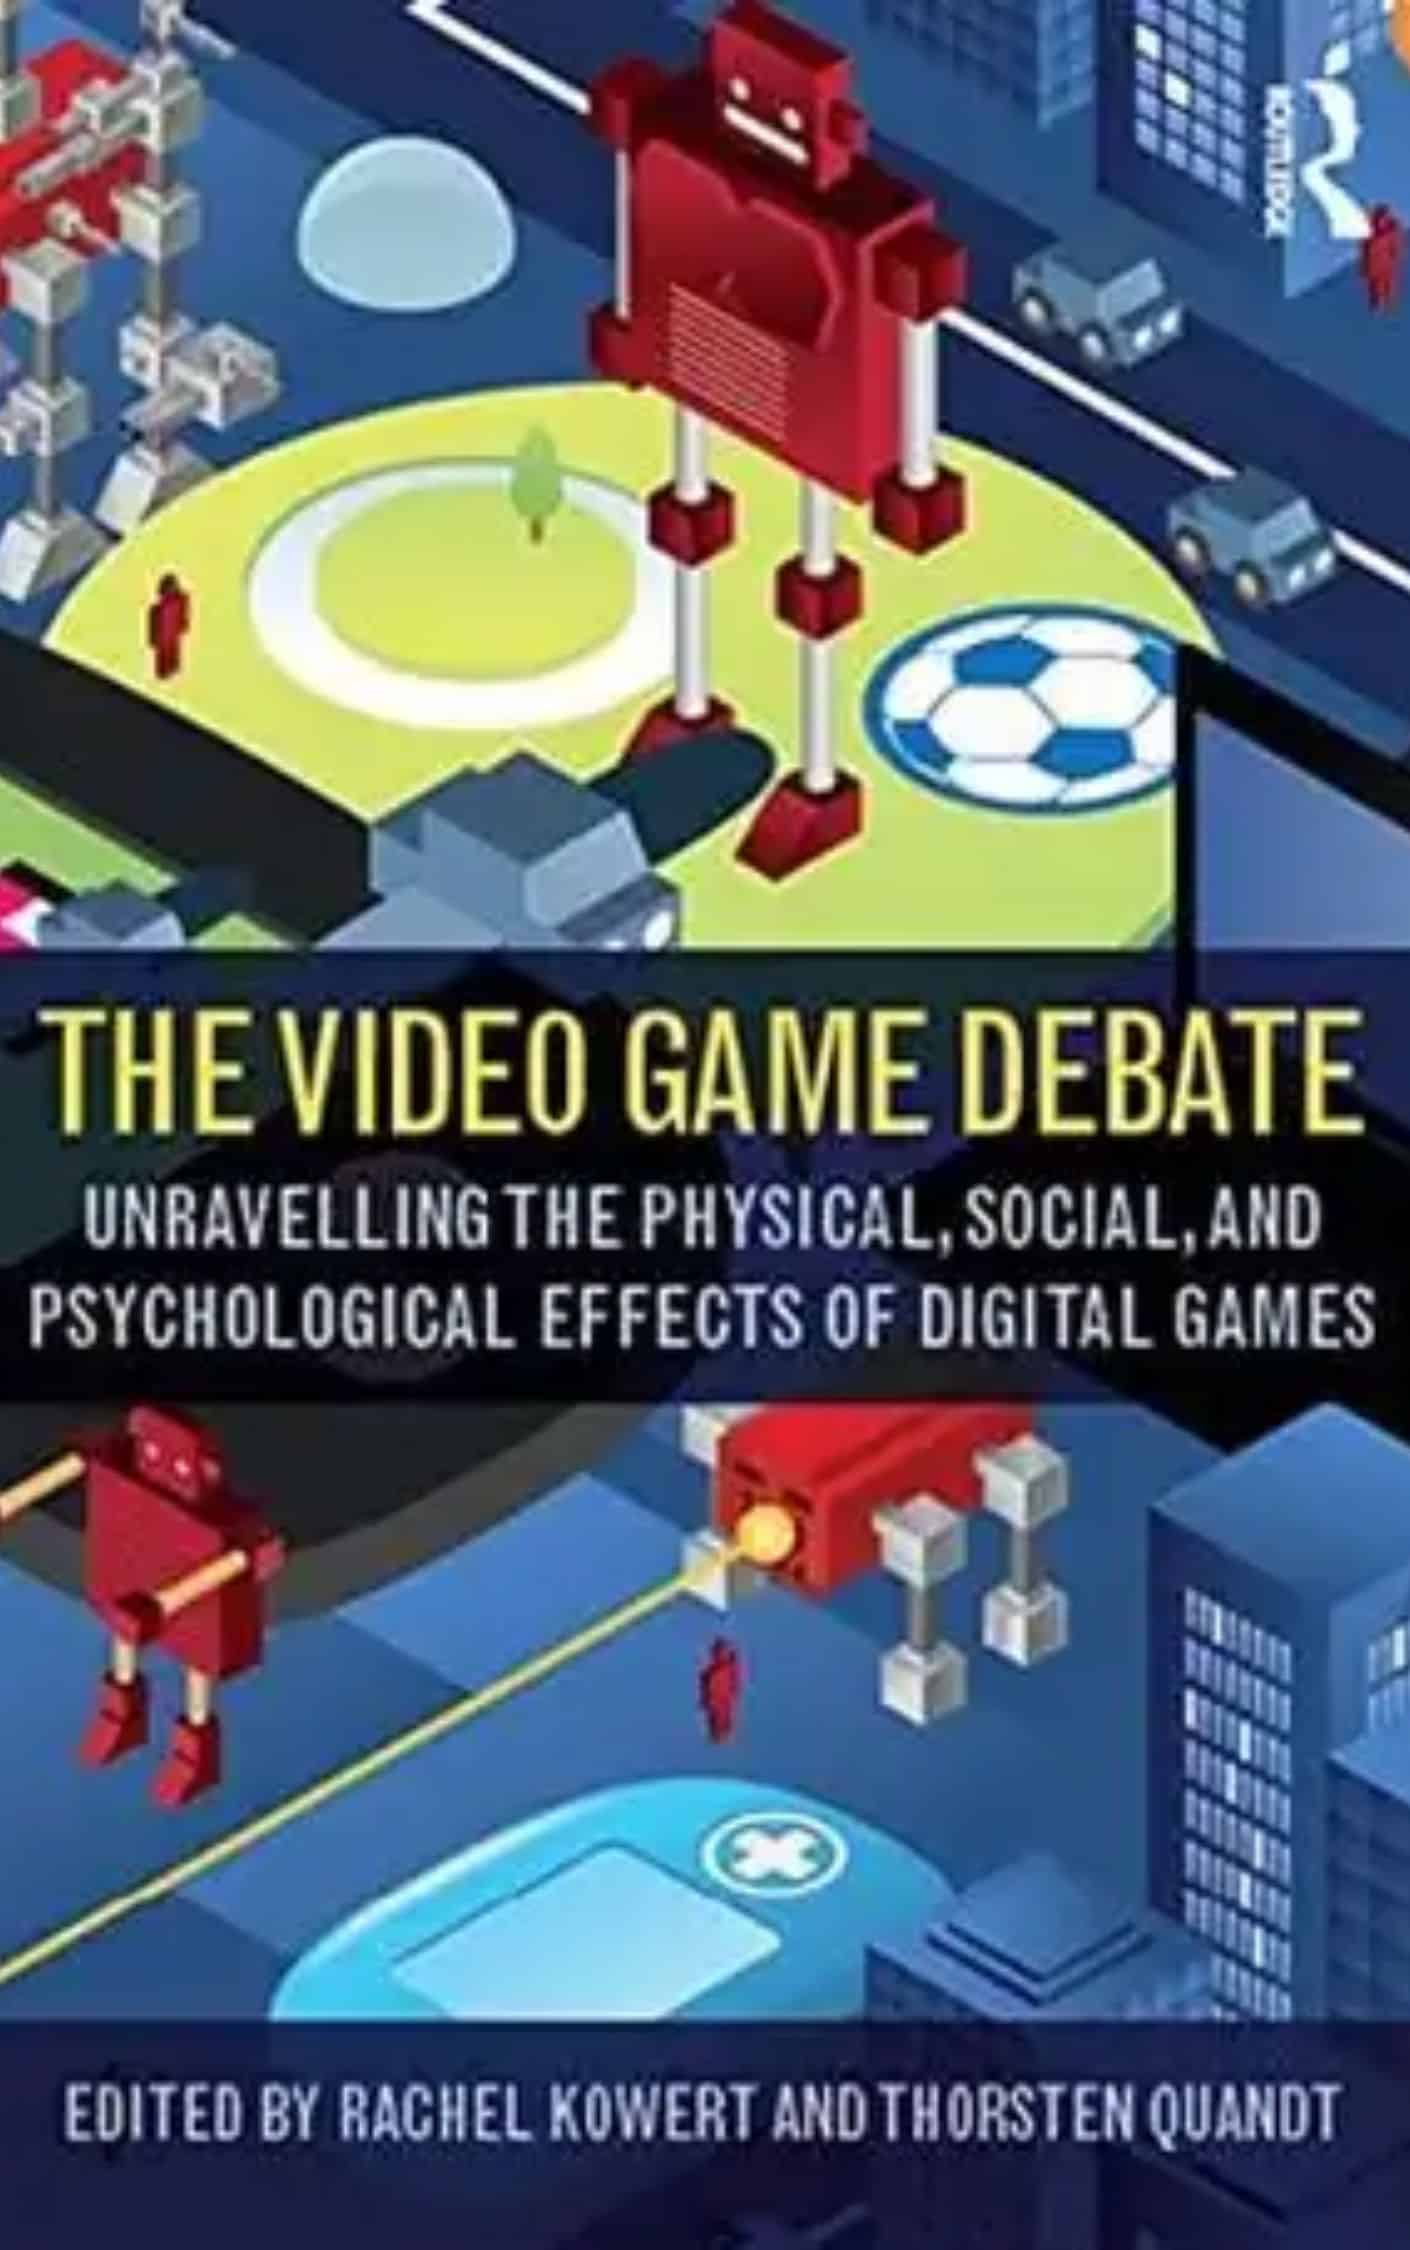 The Science of Digital Games